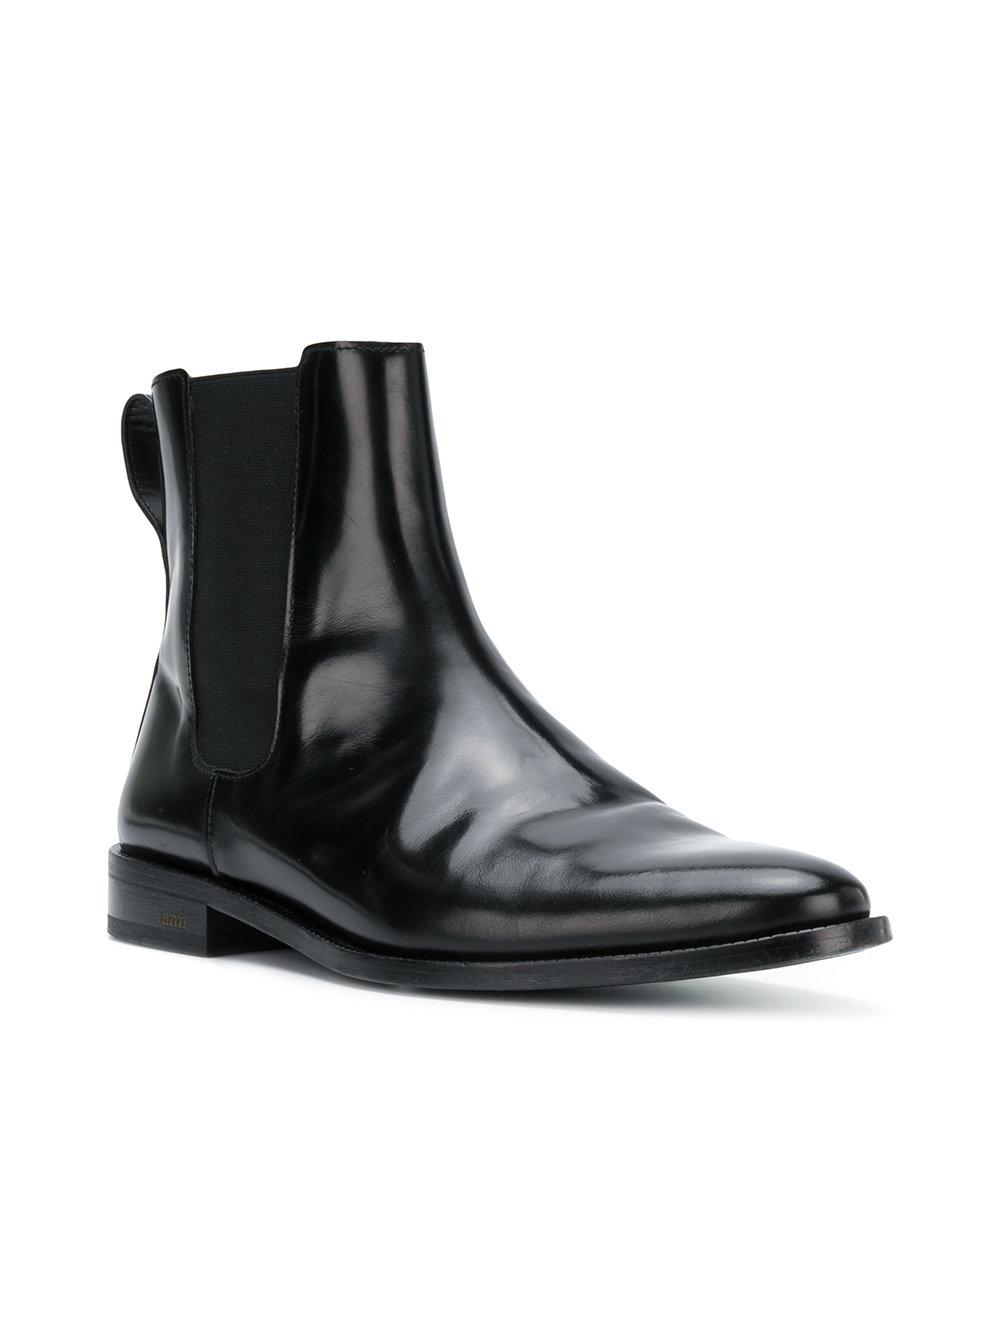 AMI Chelsea Boots With Thick Leather Sole in Black for Men - Lyst